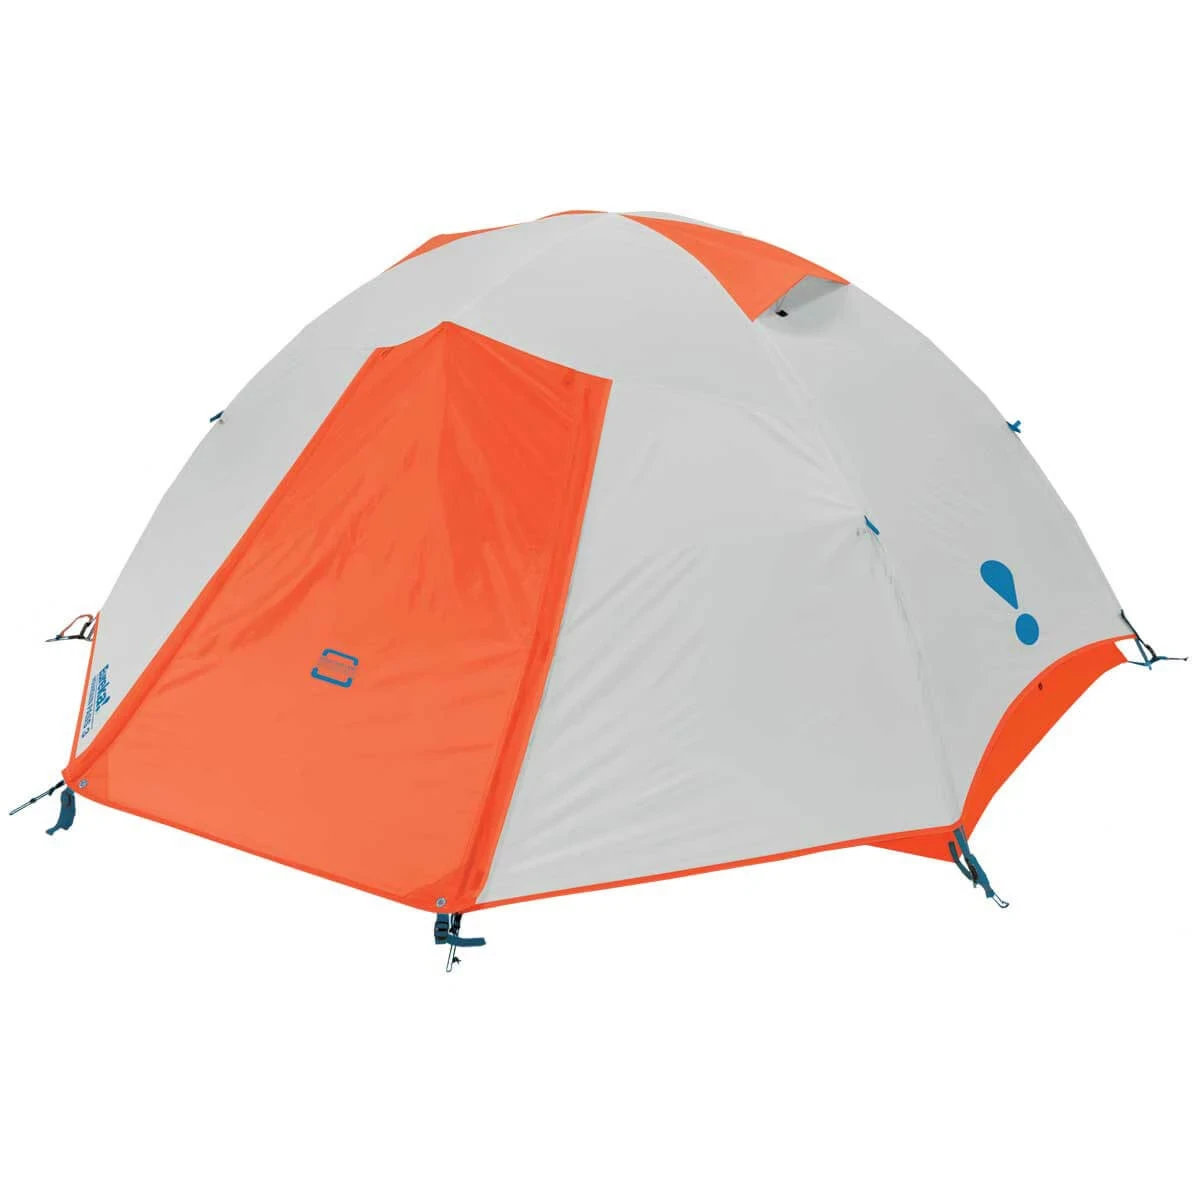 Mountain Pass 3 person tent with rainfly